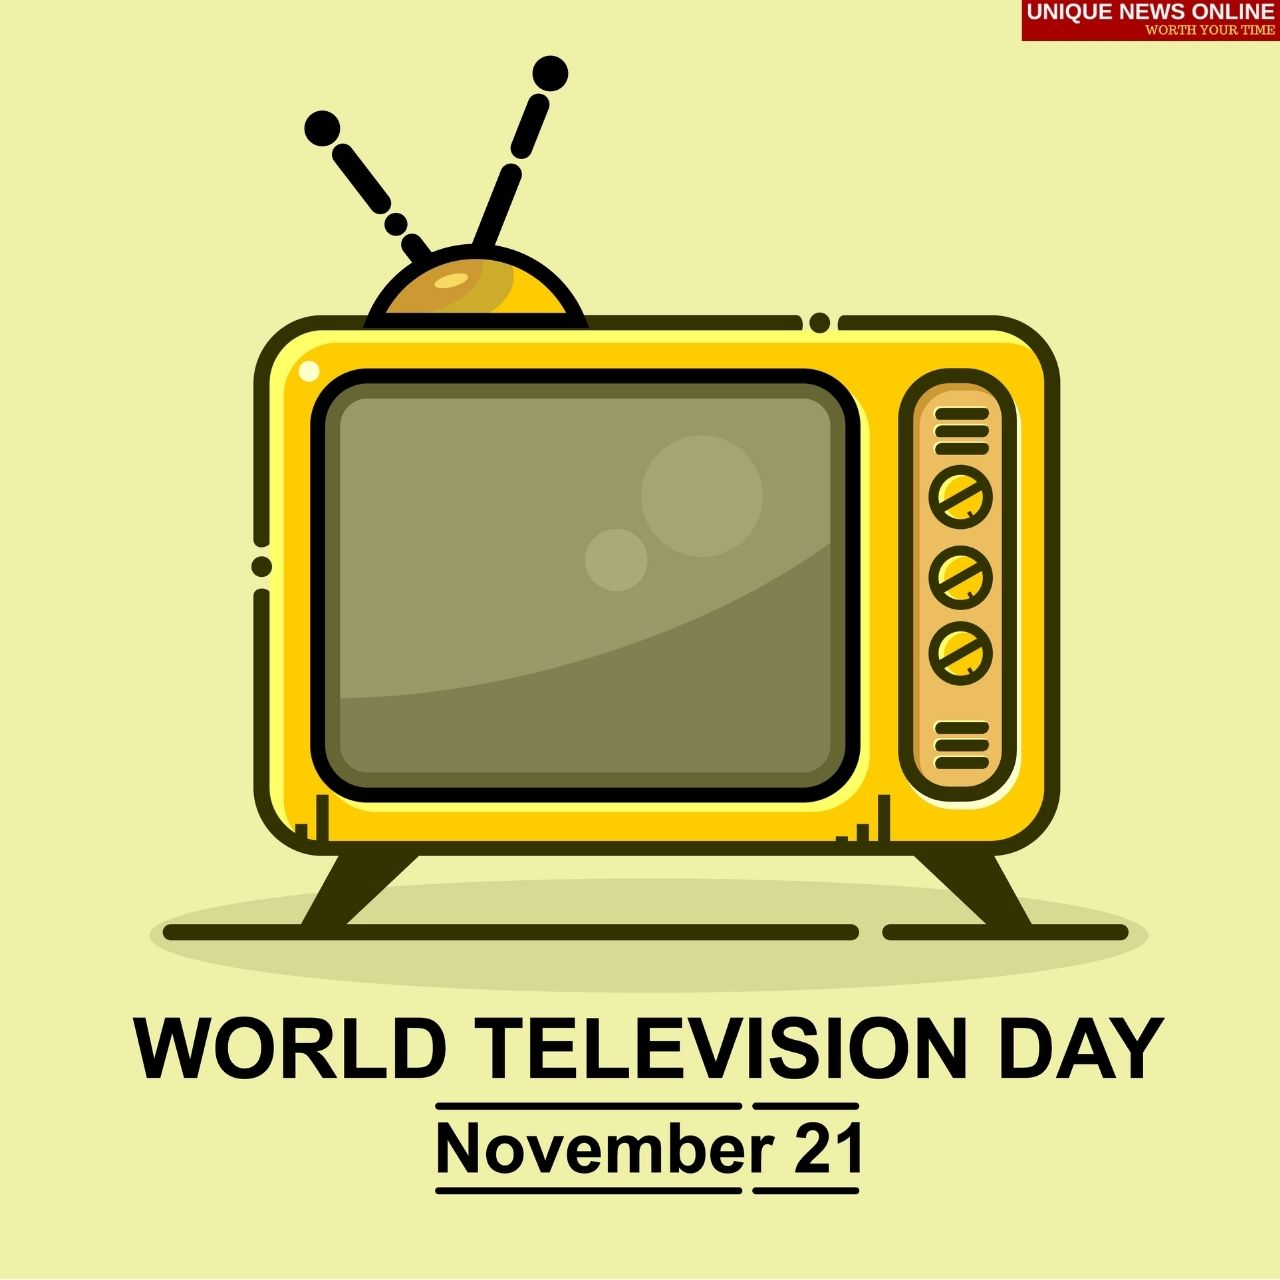 World Television Day 2021 Quotes, Poster, Images, Messages, and Slogans to create awareness